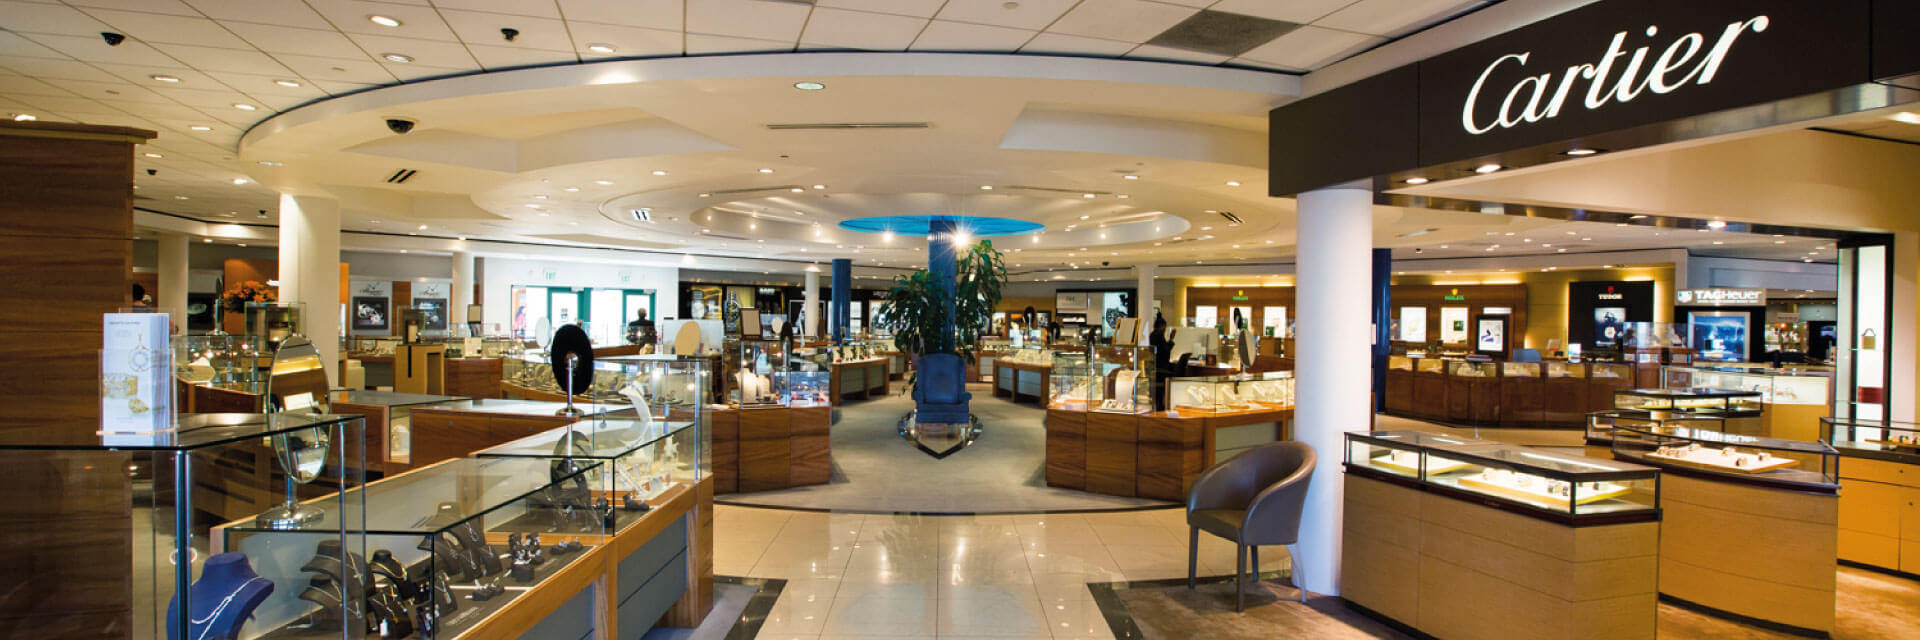 Kirk Freeport interior store in the Cayman Islands